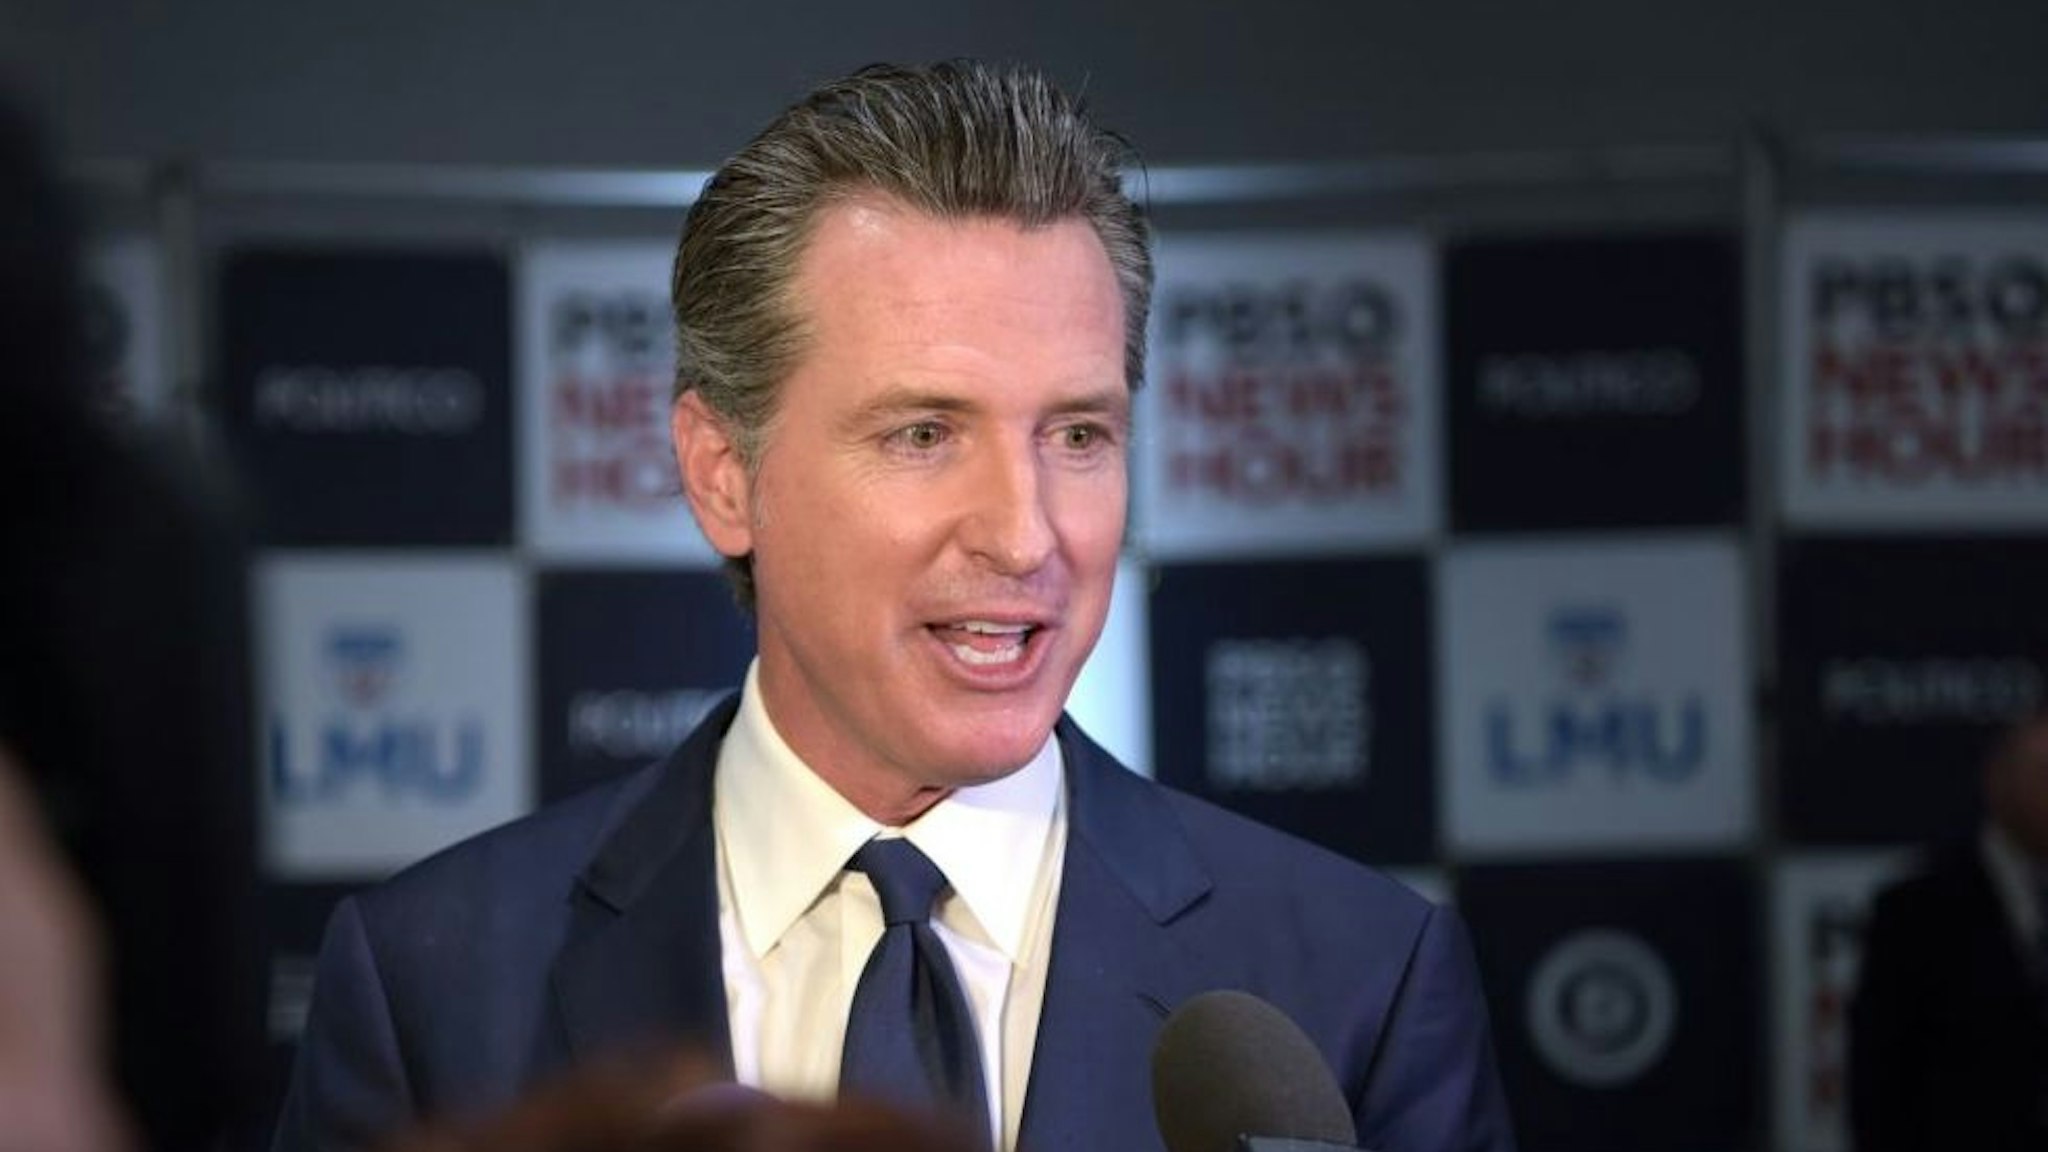 California Governor Gavin Newsom speaks to the press in the spin room after the sixth Democratic primary debate of the 2020 presidential campaign season co-hosted by PBS NewsHour &amp; Politico at Loyola Marymount University in Los Angeles, California on December 19, 2019.